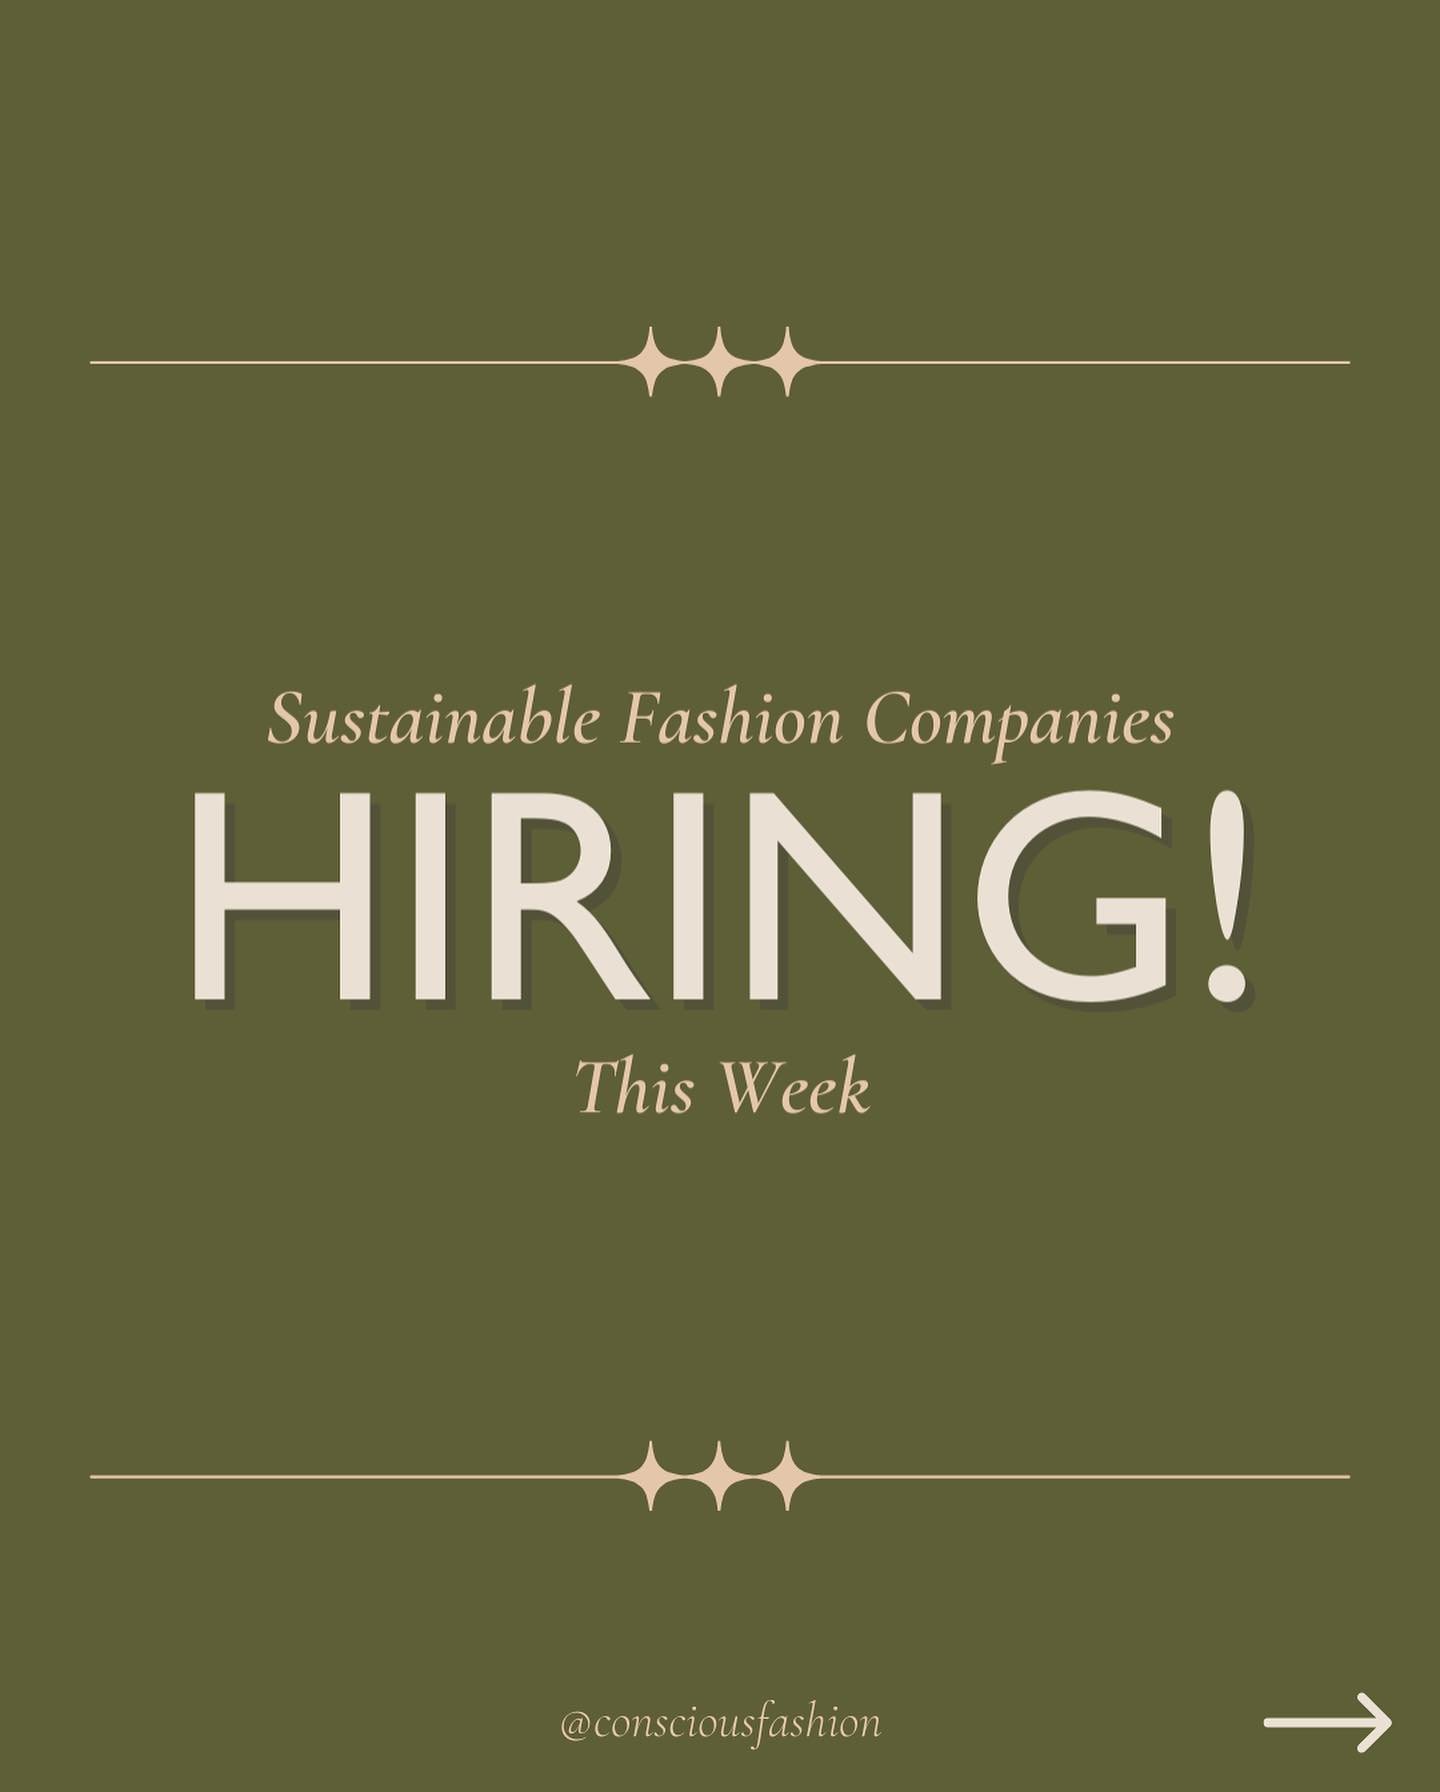 🧑🏾&zwj;💻 Apply today to these and 10+ new sustainable fashion job opportunities added to our Job Board!⁠
⁠
🌏  We update our Job Board with sustainable fashion job opportunities worldwide every week! Go to consciousfashion.co/jobs to check out Our